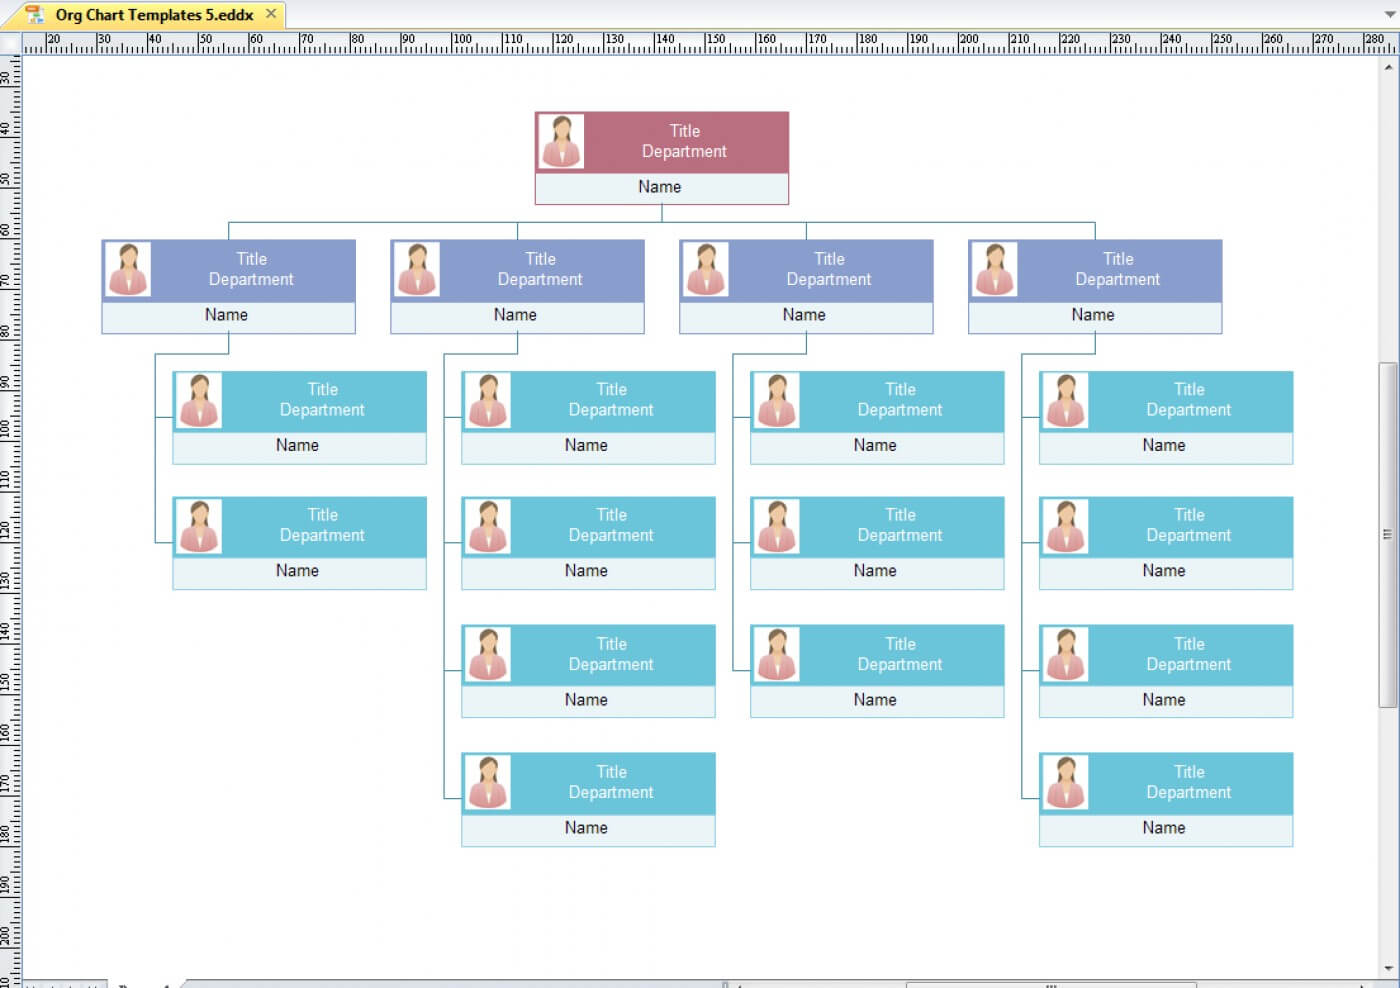 008 Organizational Chart Template Excel Download Ideas Org Pertaining To Org Chart Word Template